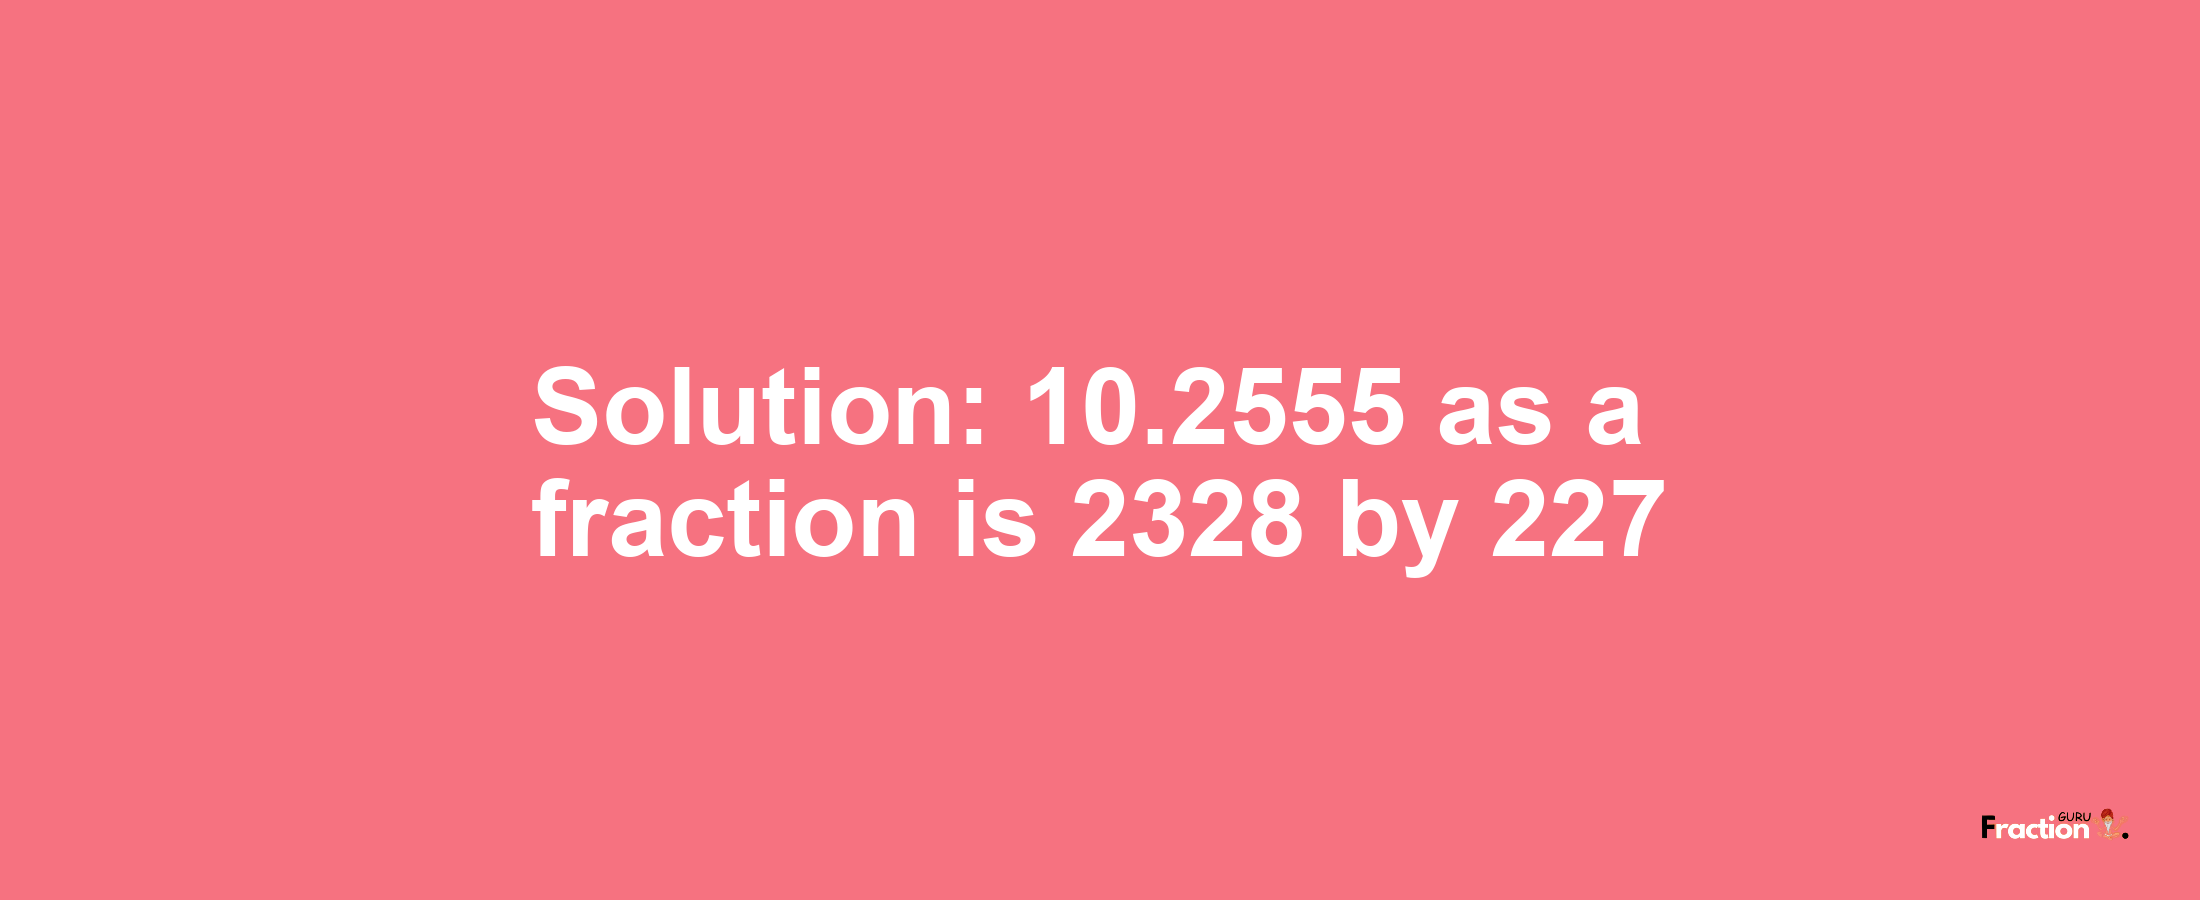 Solution:10.2555 as a fraction is 2328/227